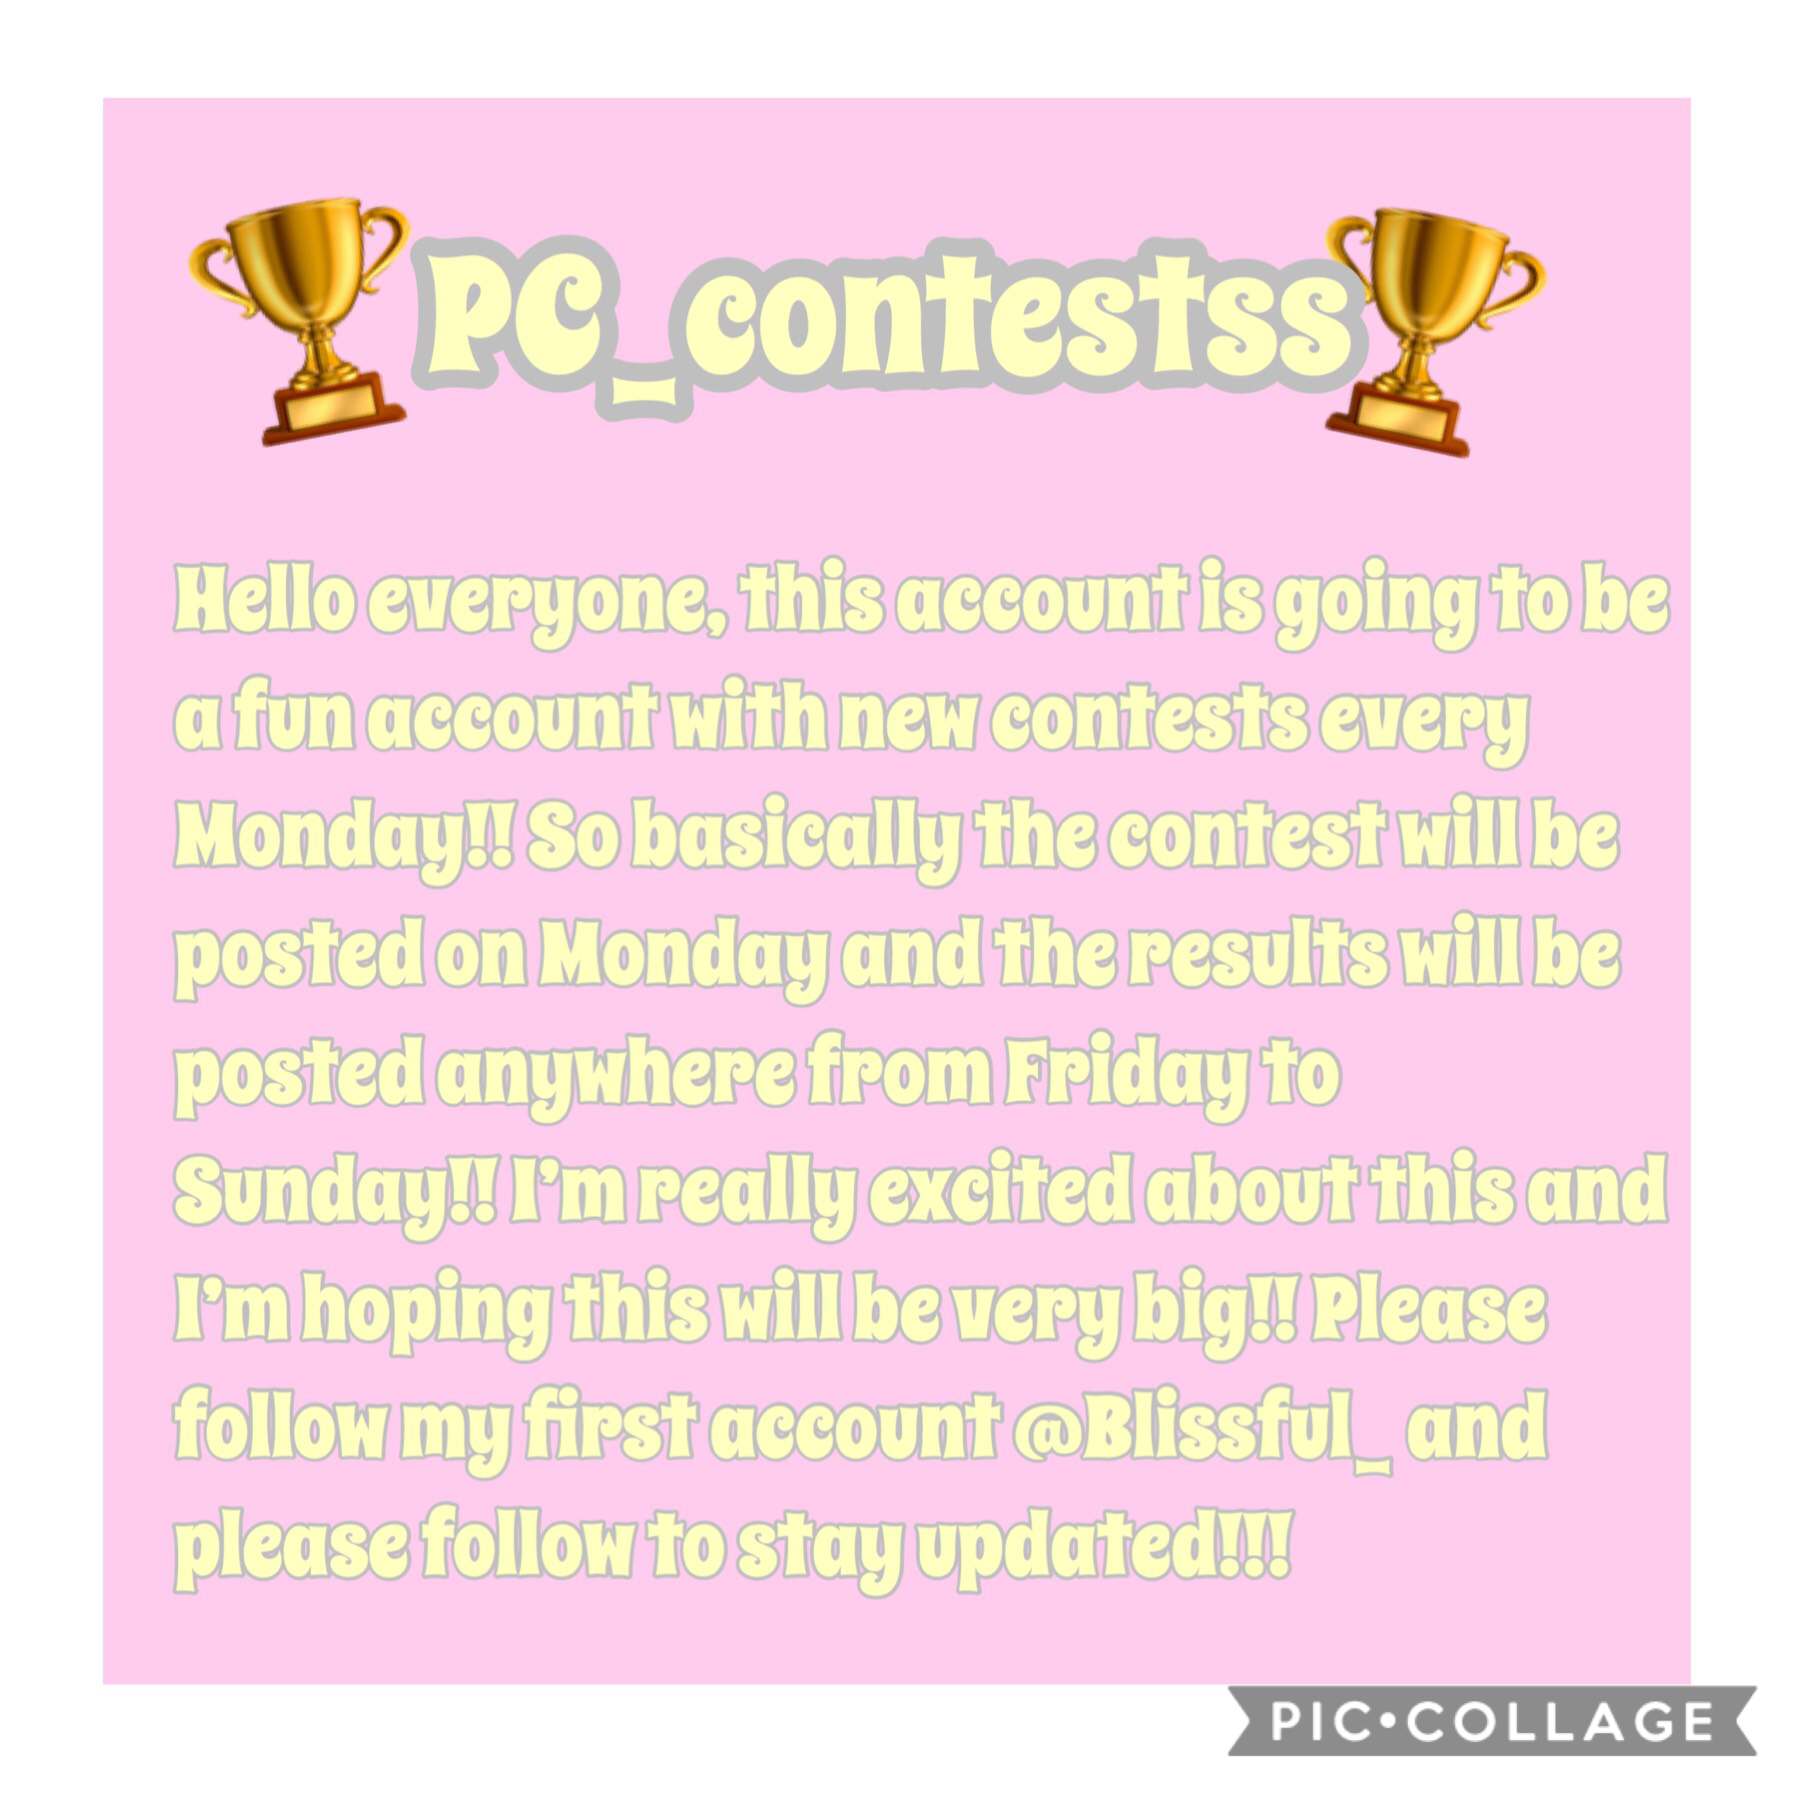 Comment down below contest ideas💓 and follow my main @Blissful_